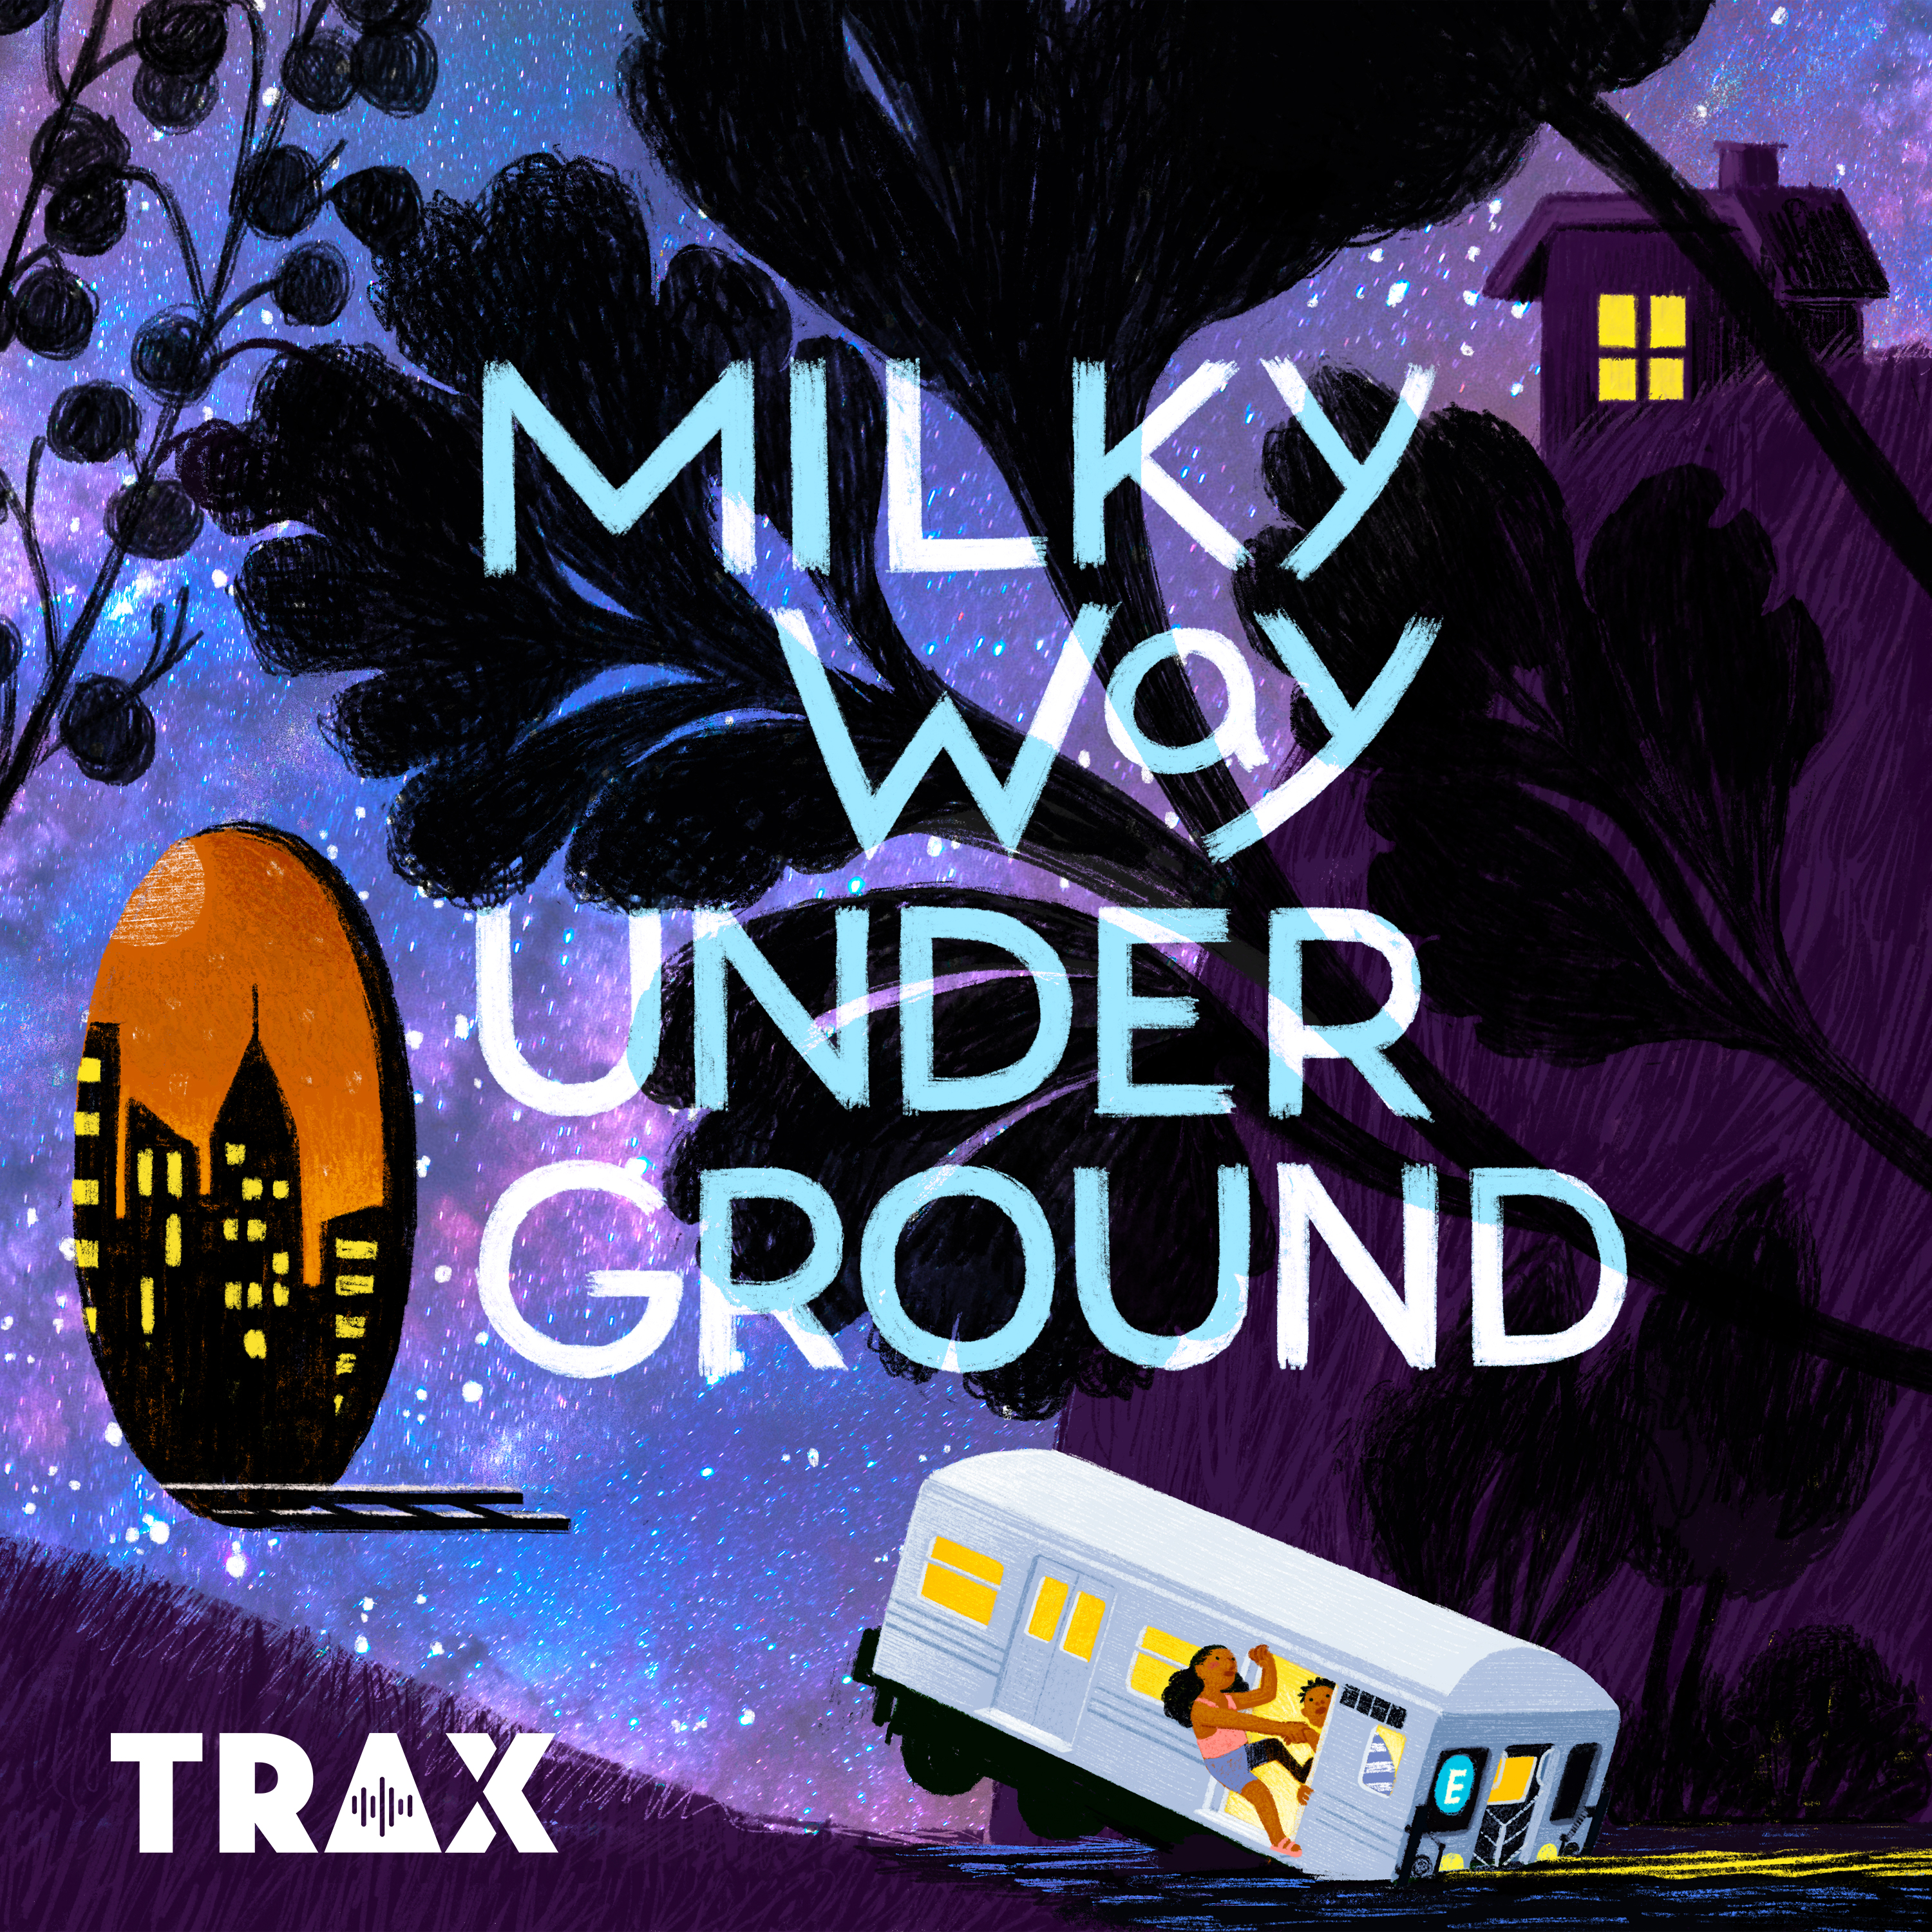 A Holiday Present from Milky Way Underground